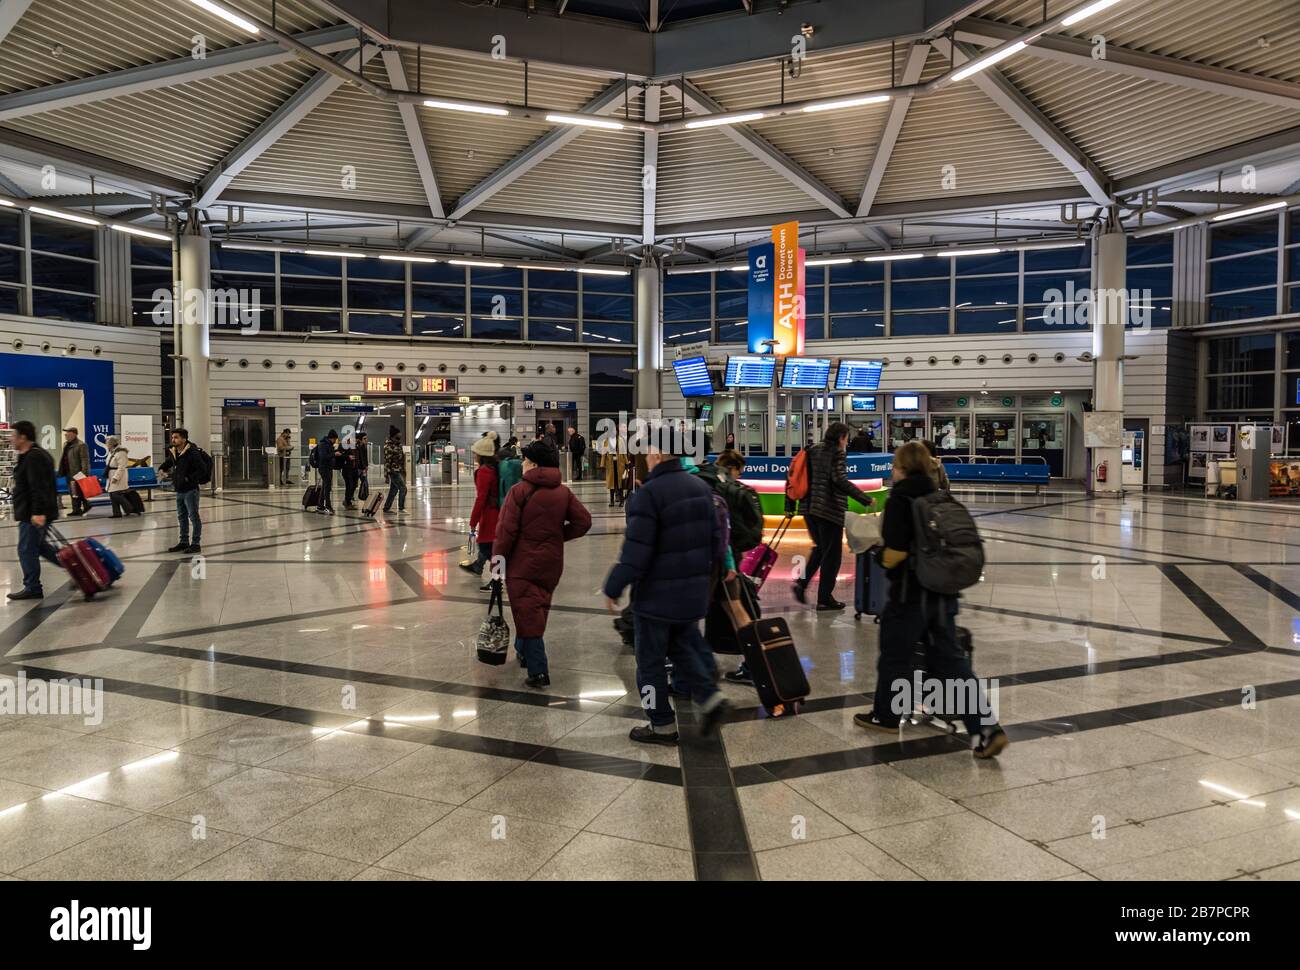 Athens Old Town, Attica/ Greece - 12 28 2019: Travellers walking through the transportation hub of the Athens Airport metro hall Stock Photo